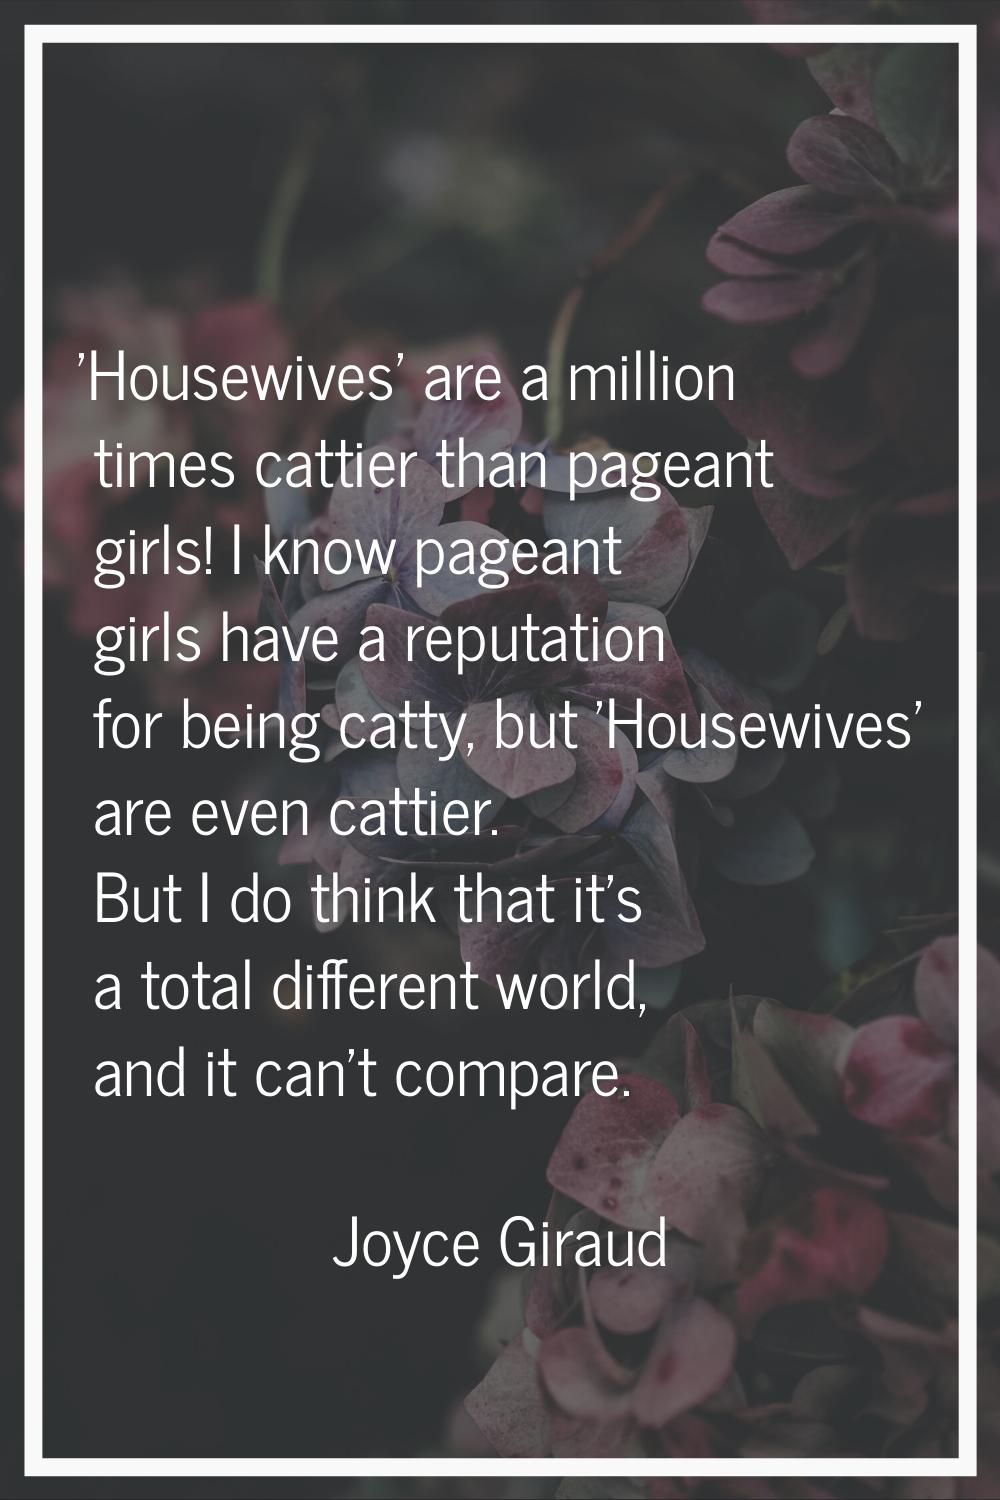 'Housewives' are a million times cattier than pageant girls! I know pageant girls have a reputation